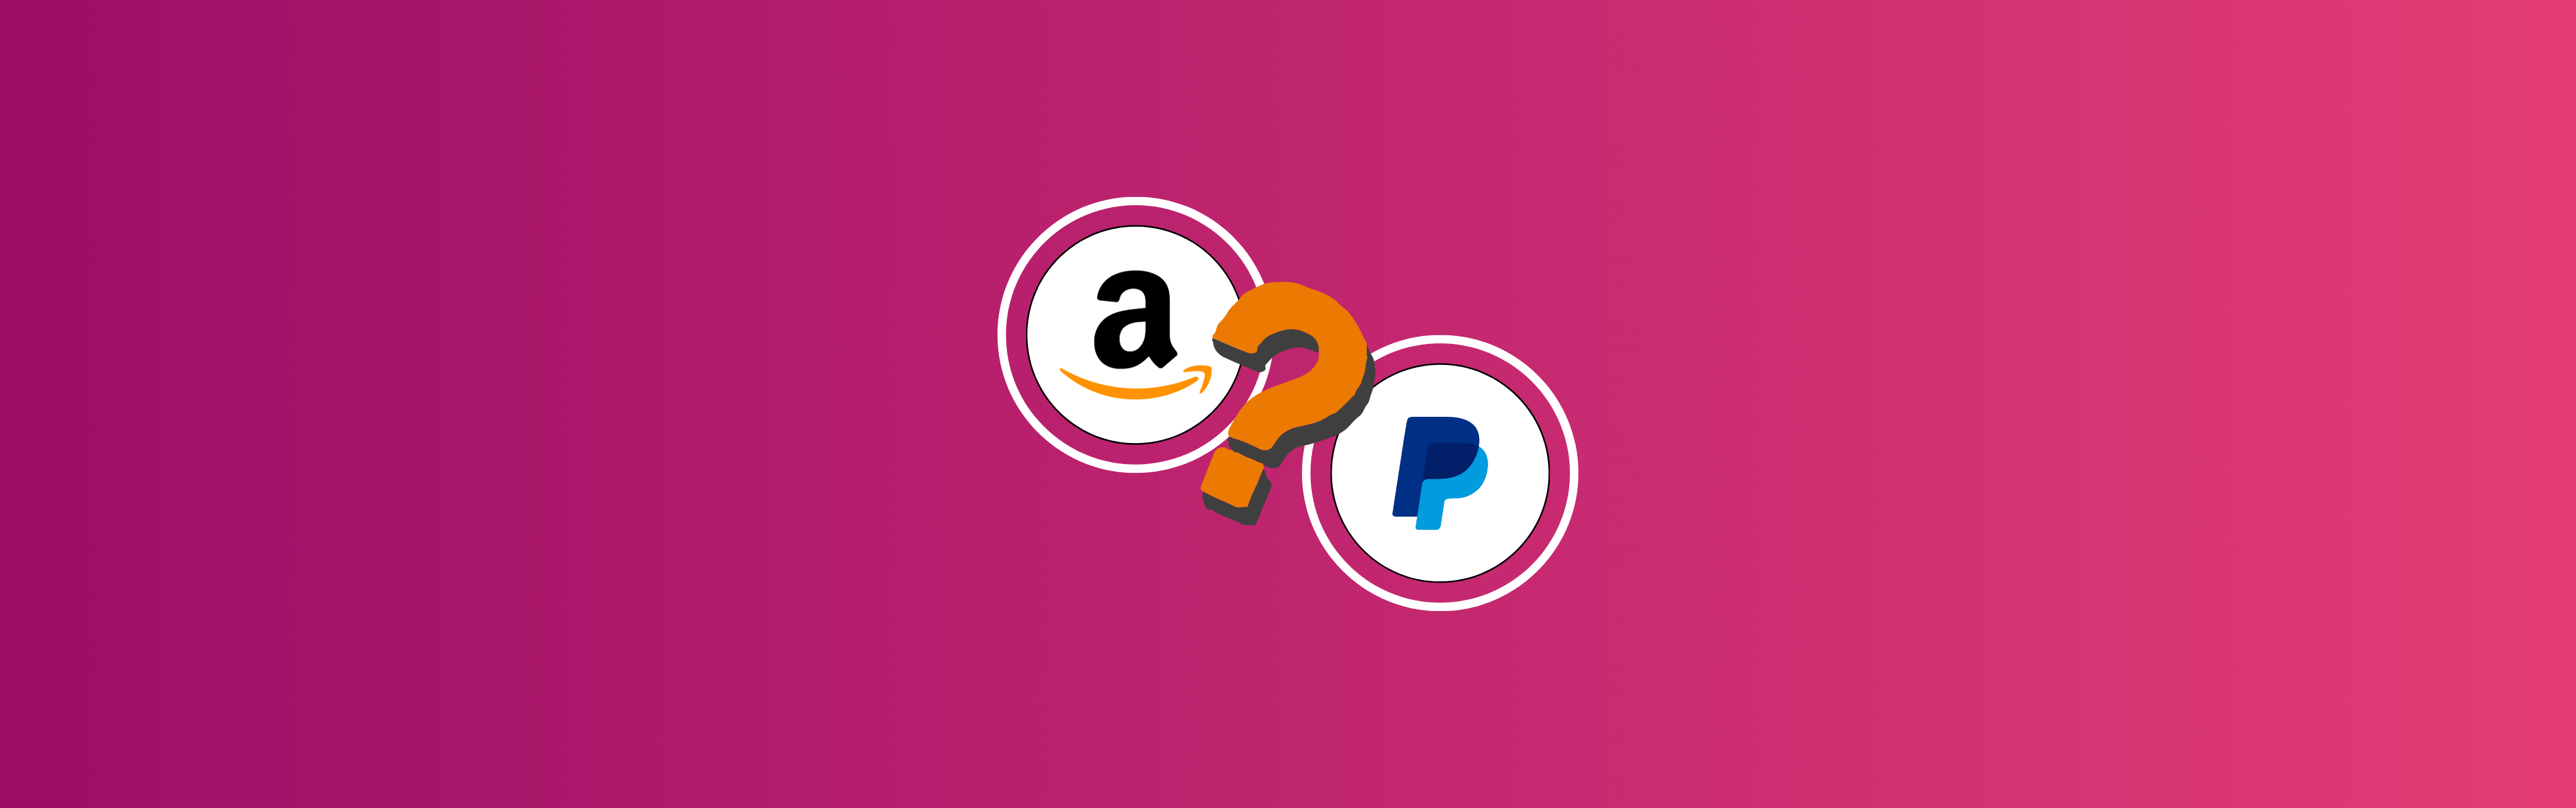 Can You Use PayPal on Amazon? Steps to Make Amazon Accept PayPal